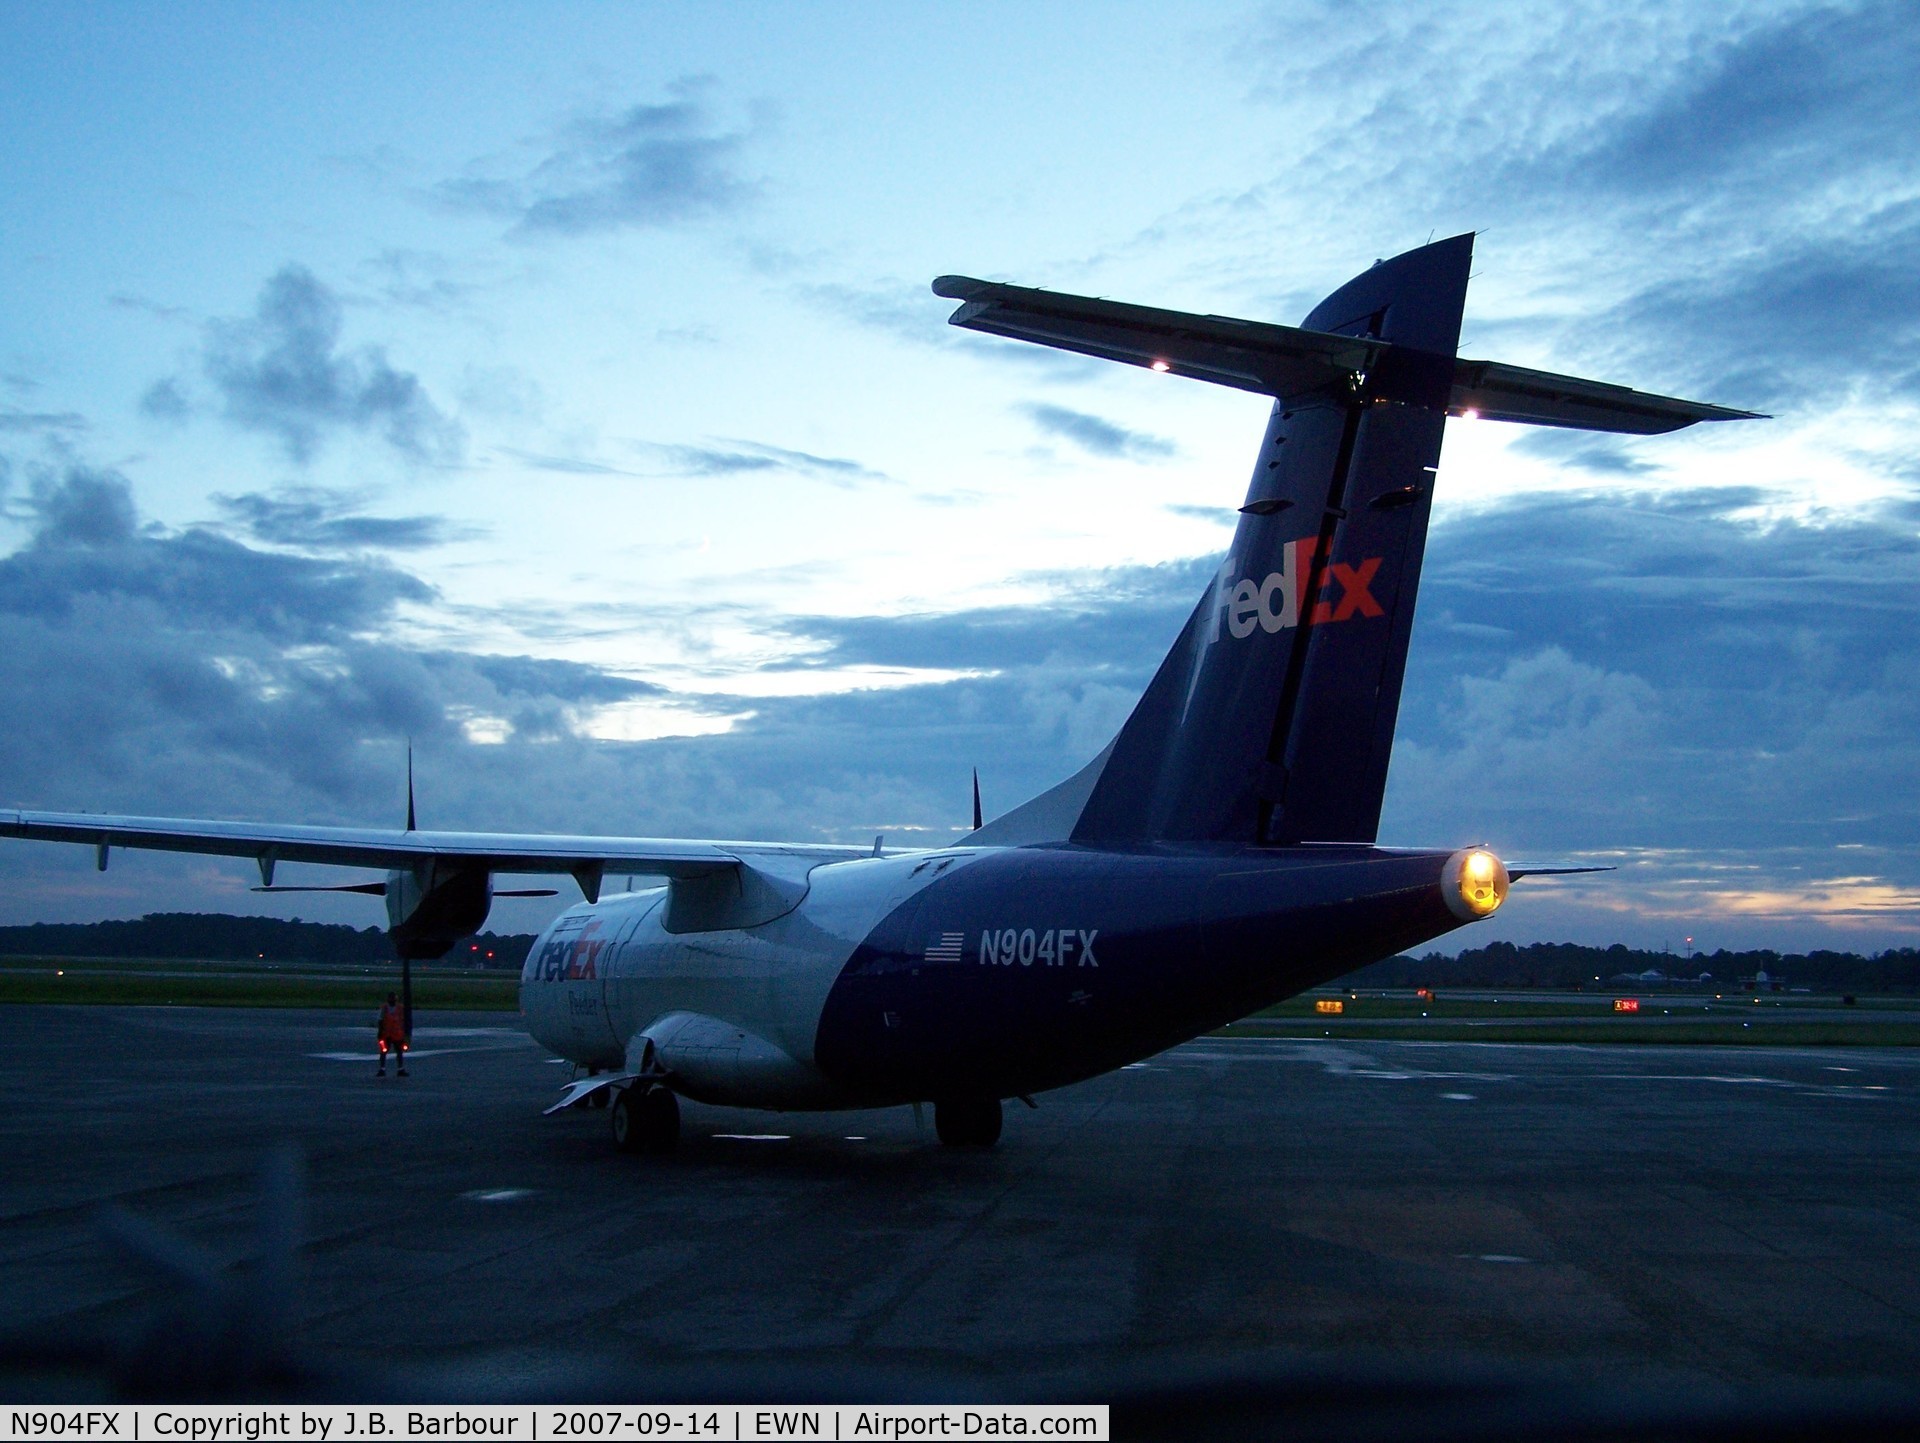 N904FX, 1991 ATR 42-320 C/N 259, Pilots were going through their check off's whle this was being shot